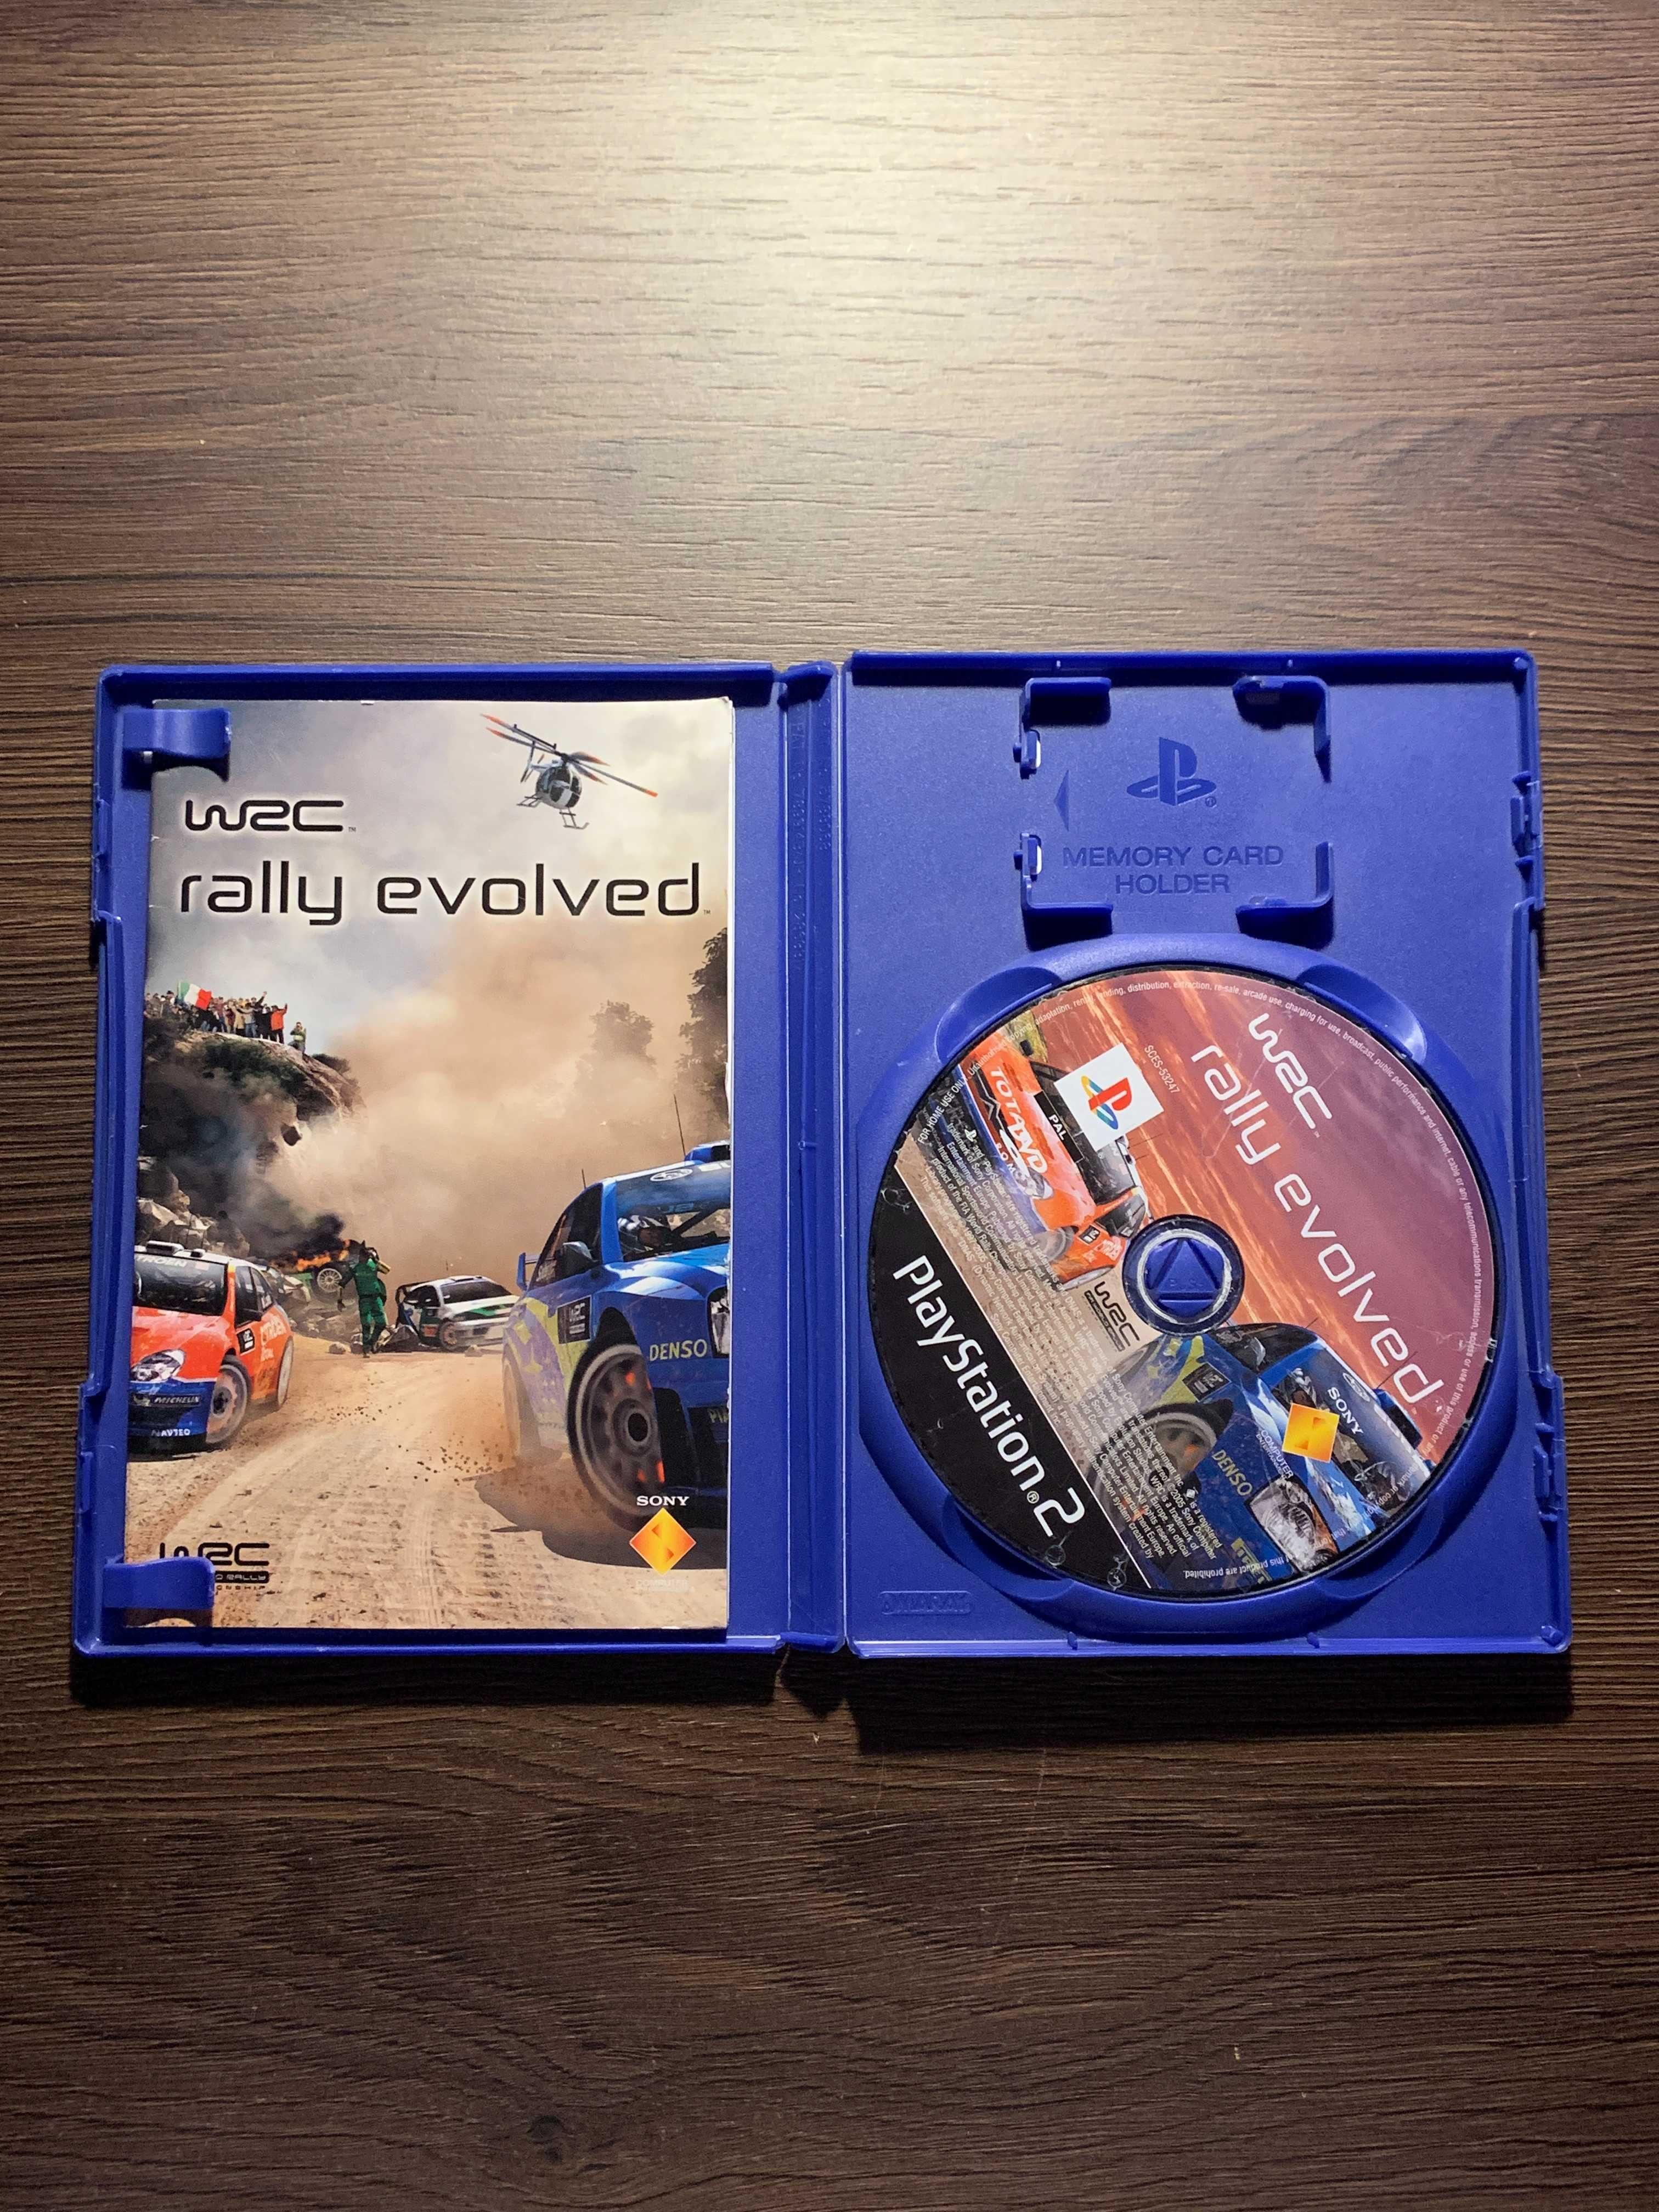 WRC rally evolved ps2